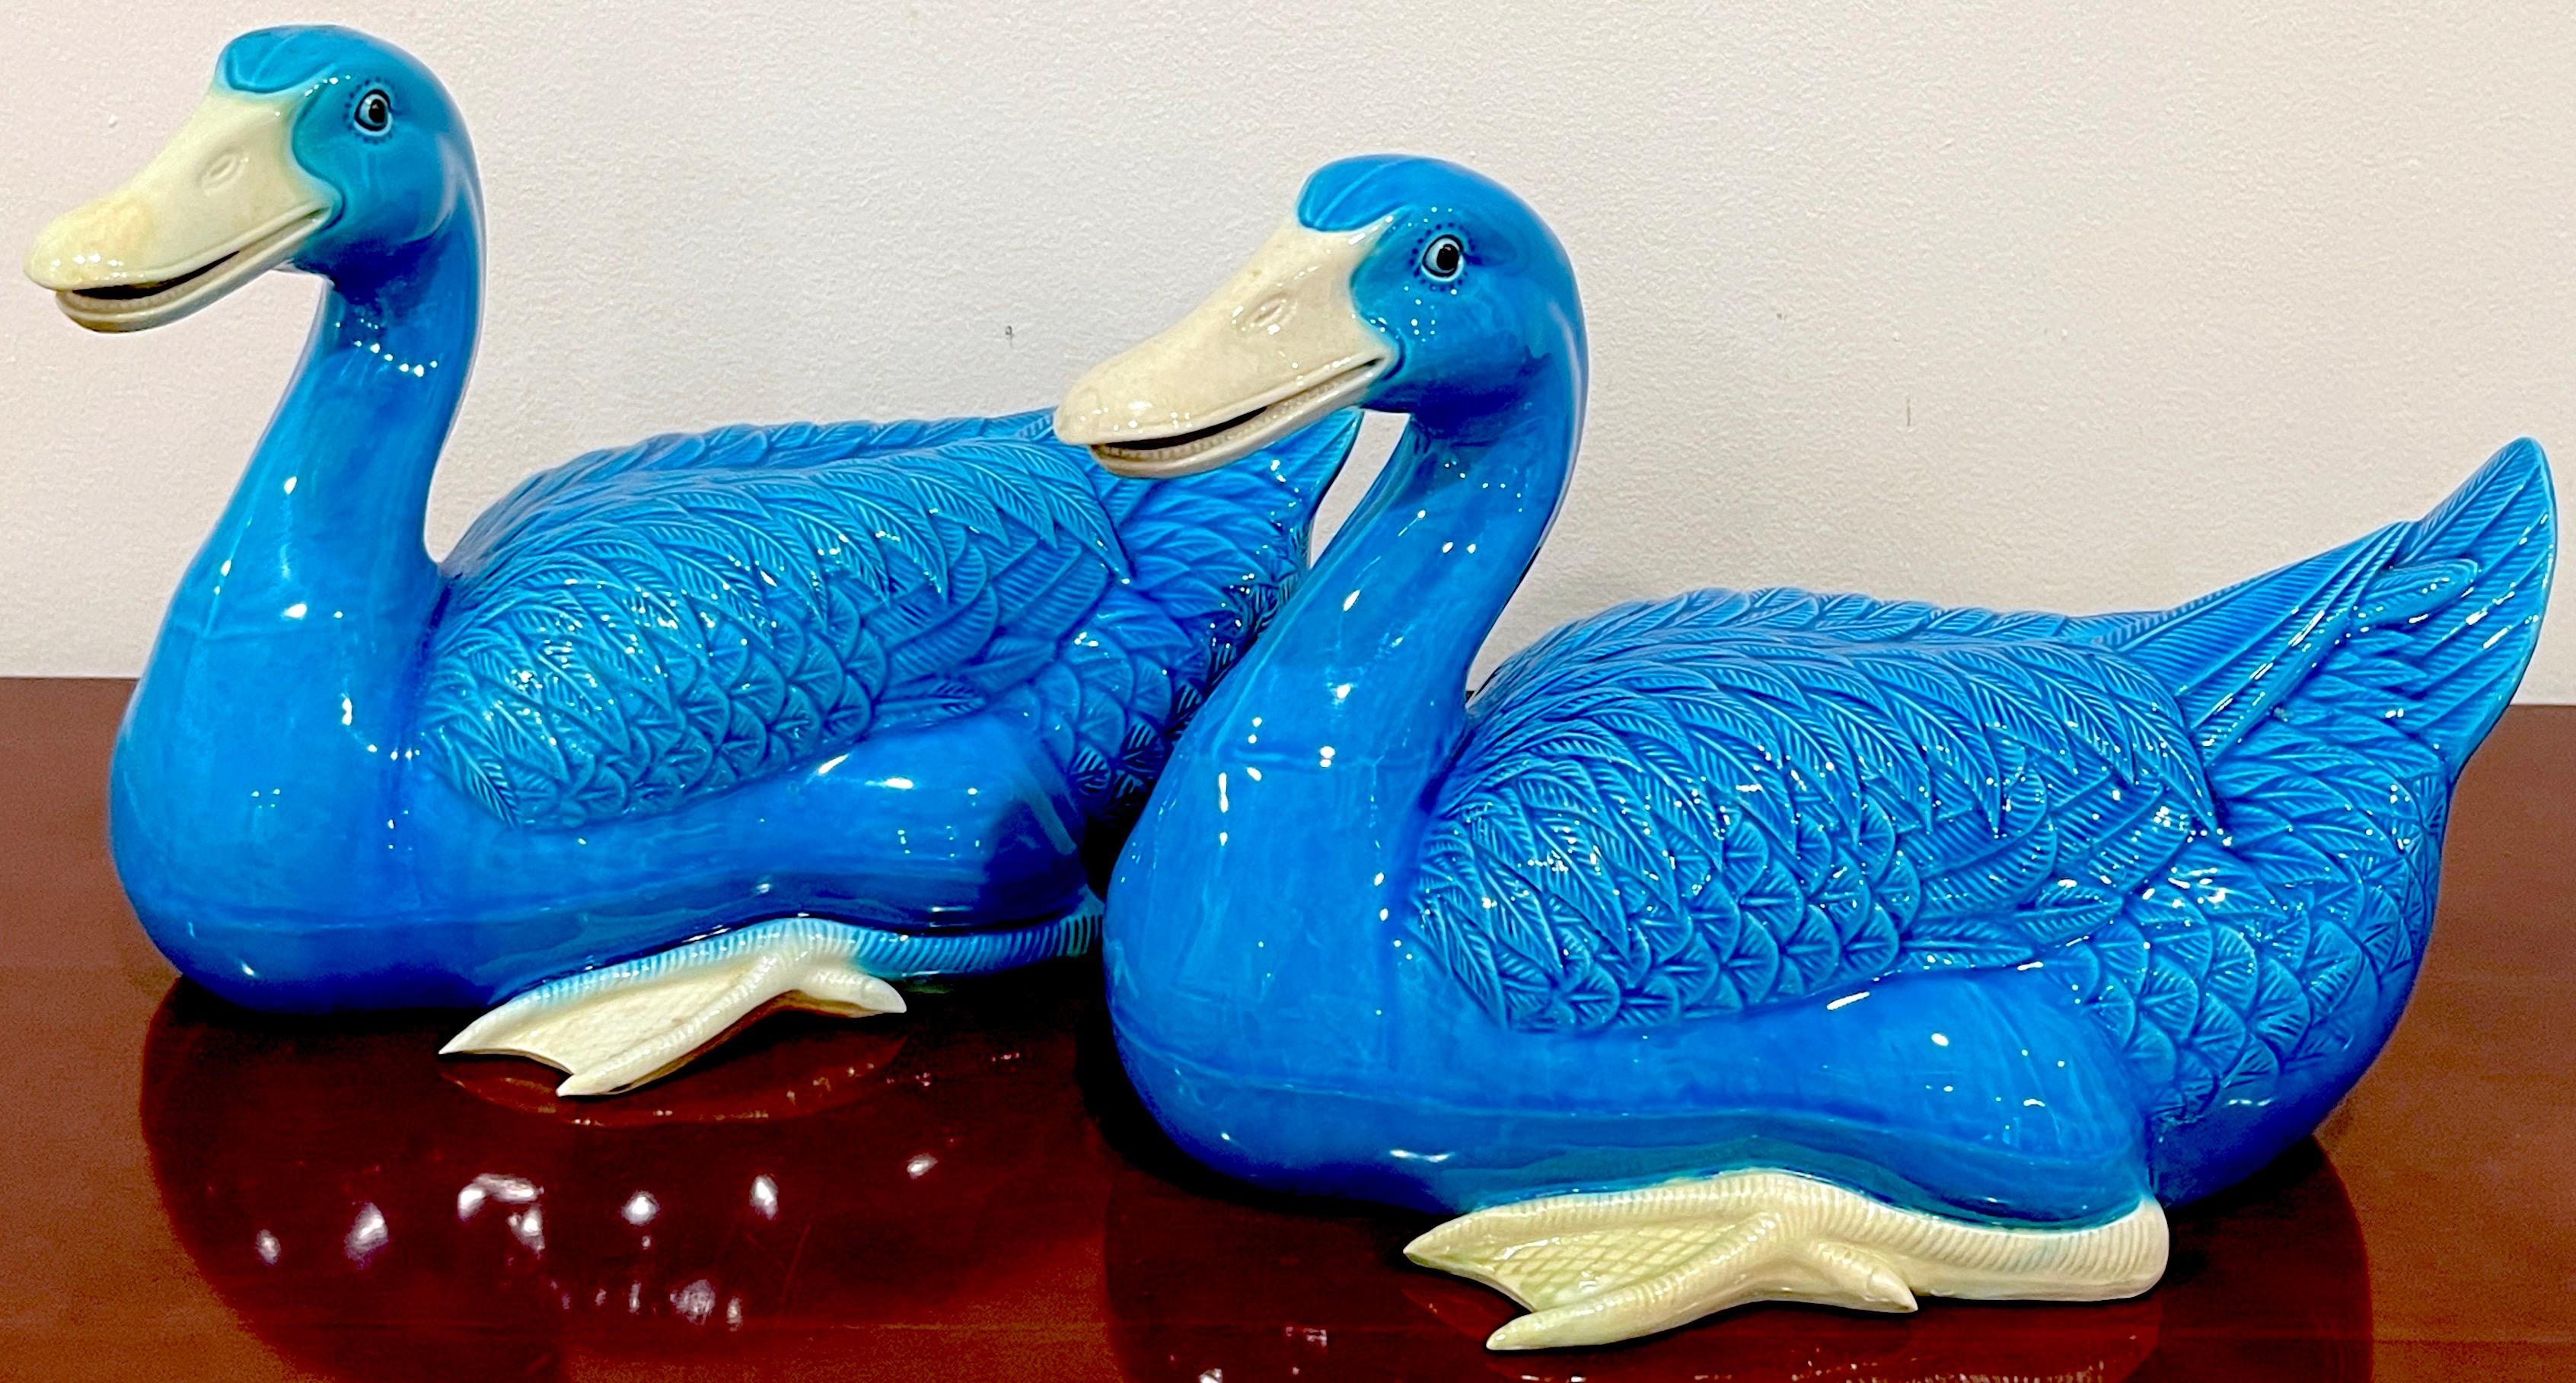 Large Pair of Turquoise Chinese Export Figures of Seated Ducks
China, 1900s
A good pair of Chinese Export Figures of Seated Ducks in a stunning turquoise glaze, originating from China in the early 1900s. These figures are of substantial size,